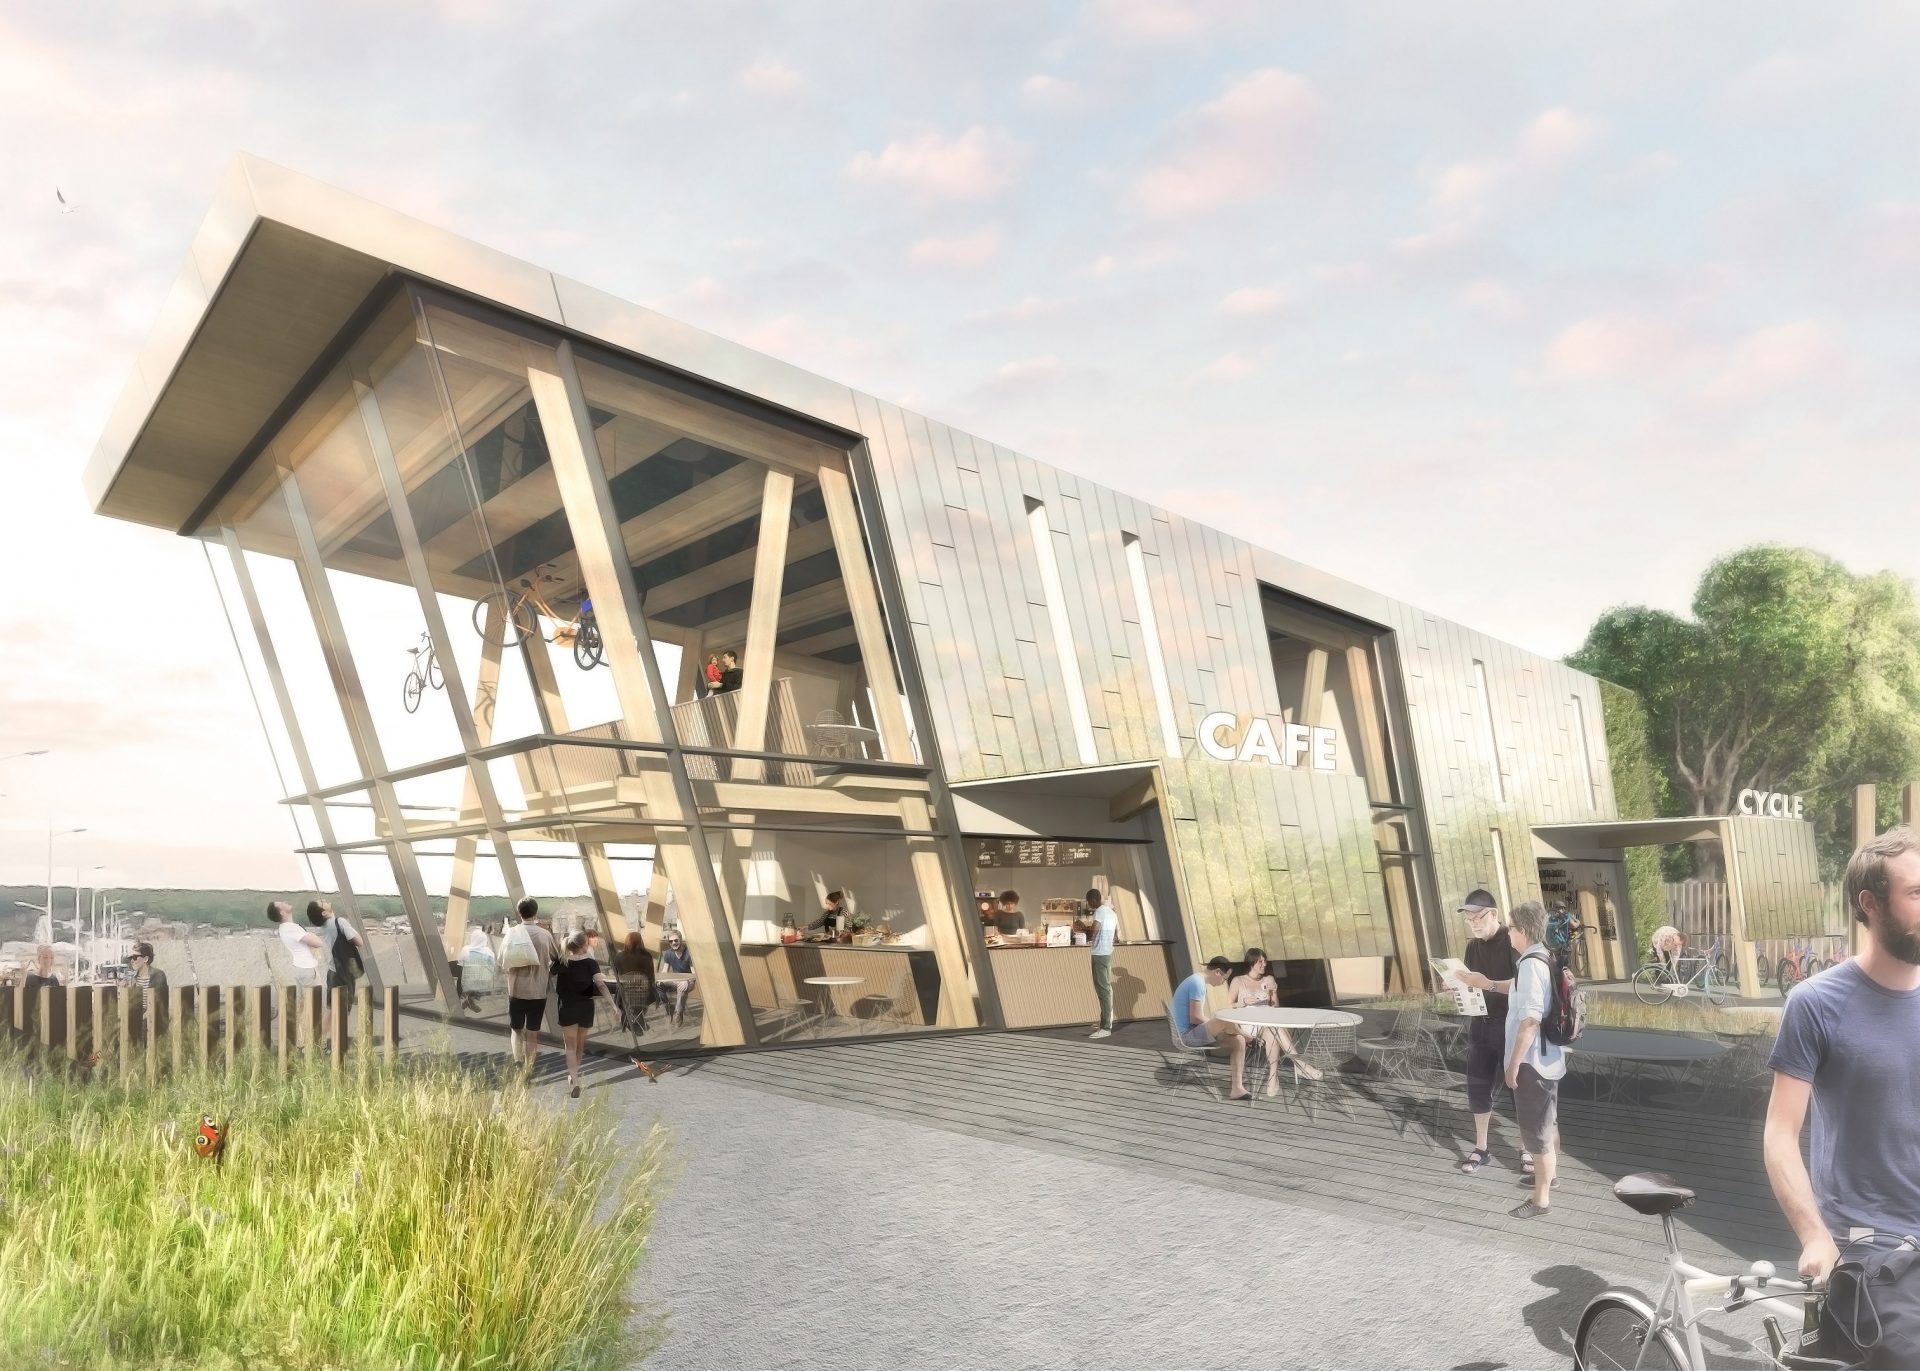 Weston-super-Mare Cycle Activities Centre Cafe Cladding Laminated Timber Frame Hipster